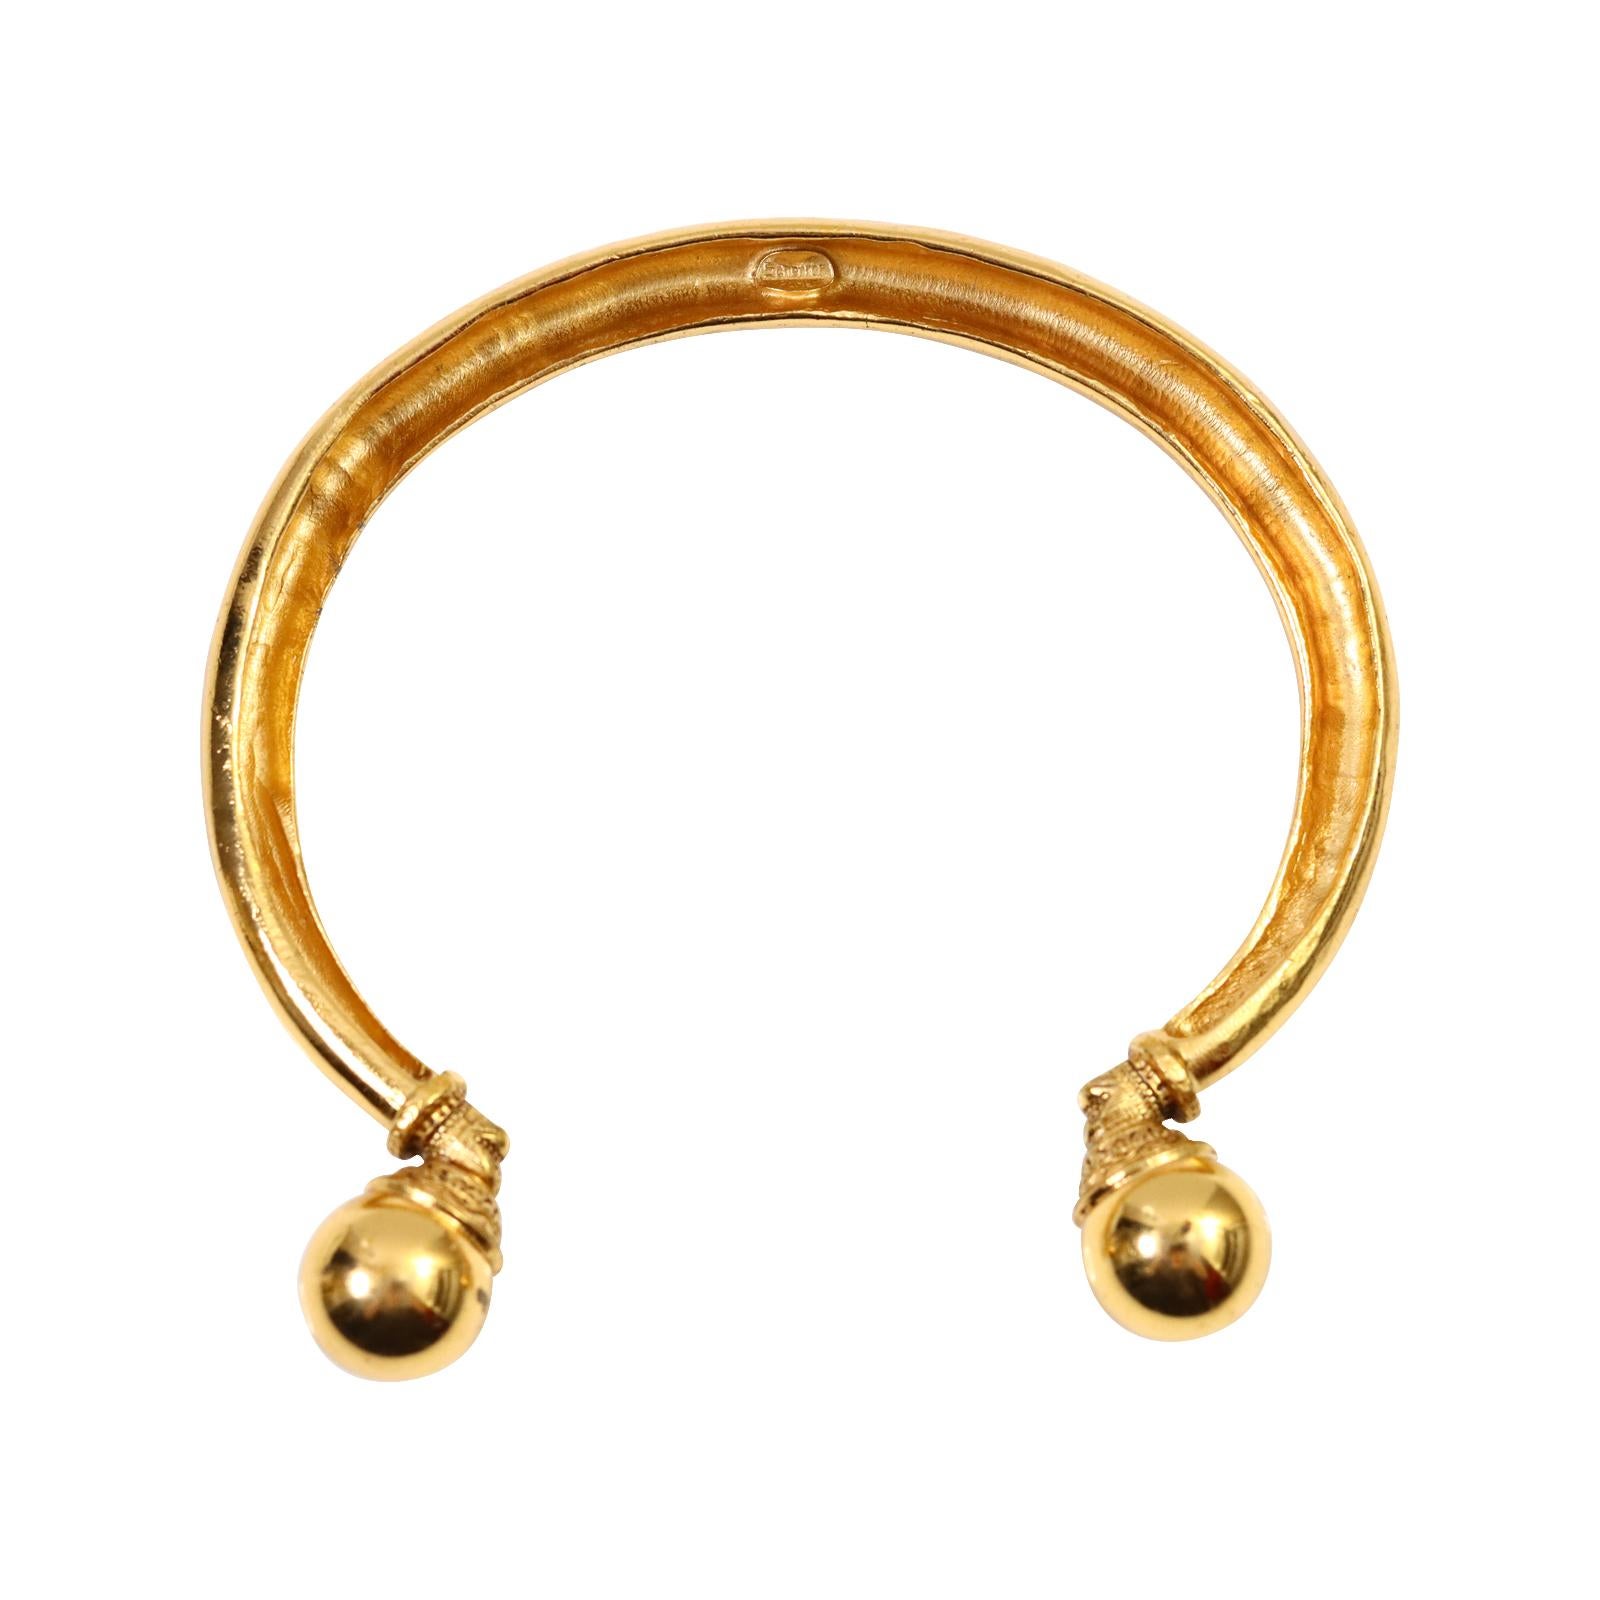 Vintage Jean Louis  Scherrer Two Ball Choker Necklace Circa 1980s In Good Condition For Sale In New York, NY